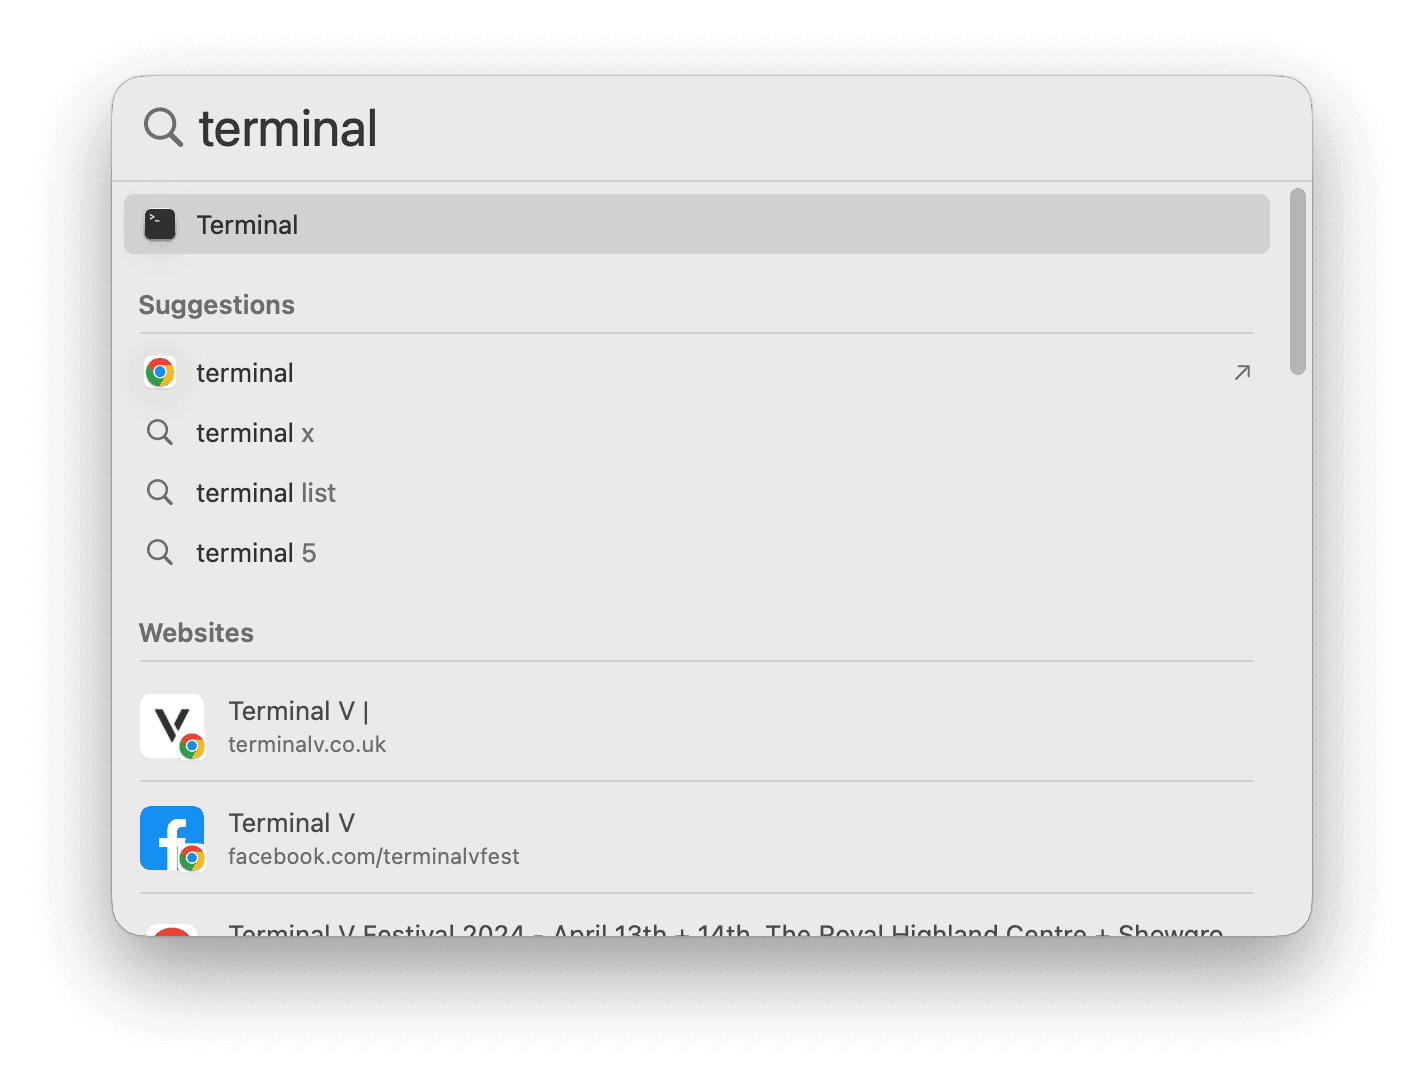 Type Terminal in the search box to open